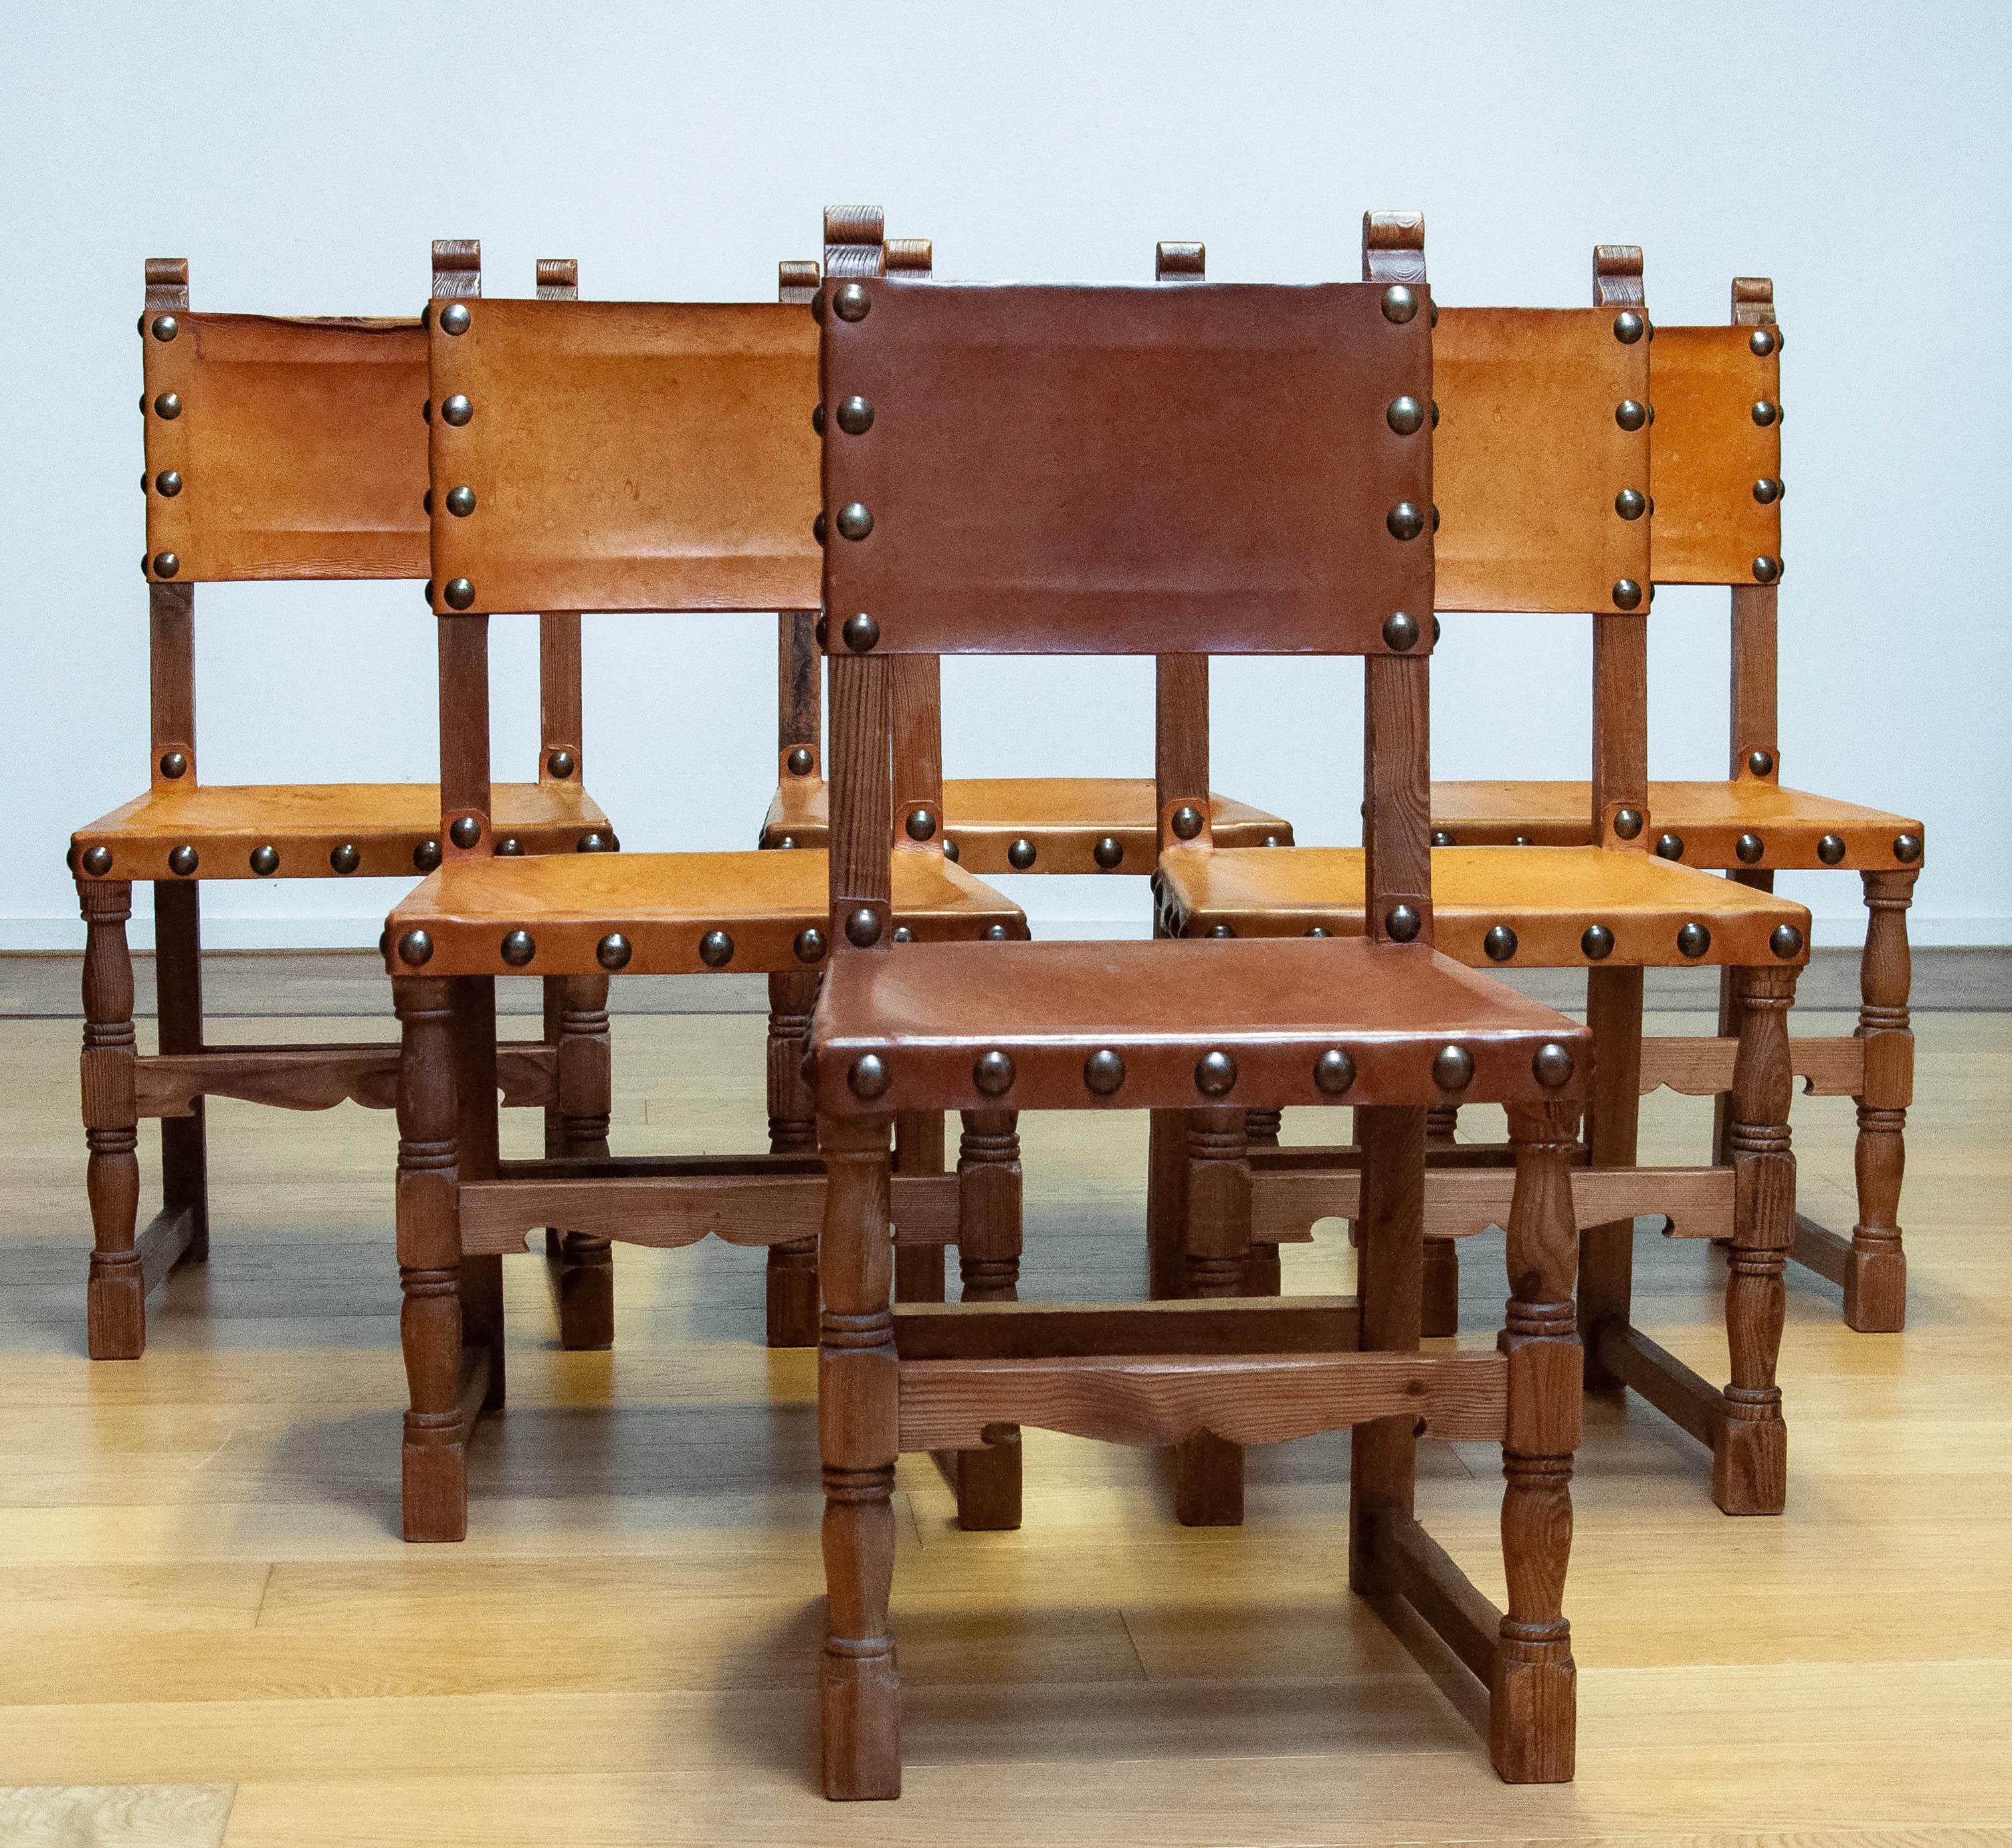 6 Antique Swedish Folk Art Farm County Dining Chairs In Pine And Tan Leather In Good Condition For Sale In Silvolde, Gelderland